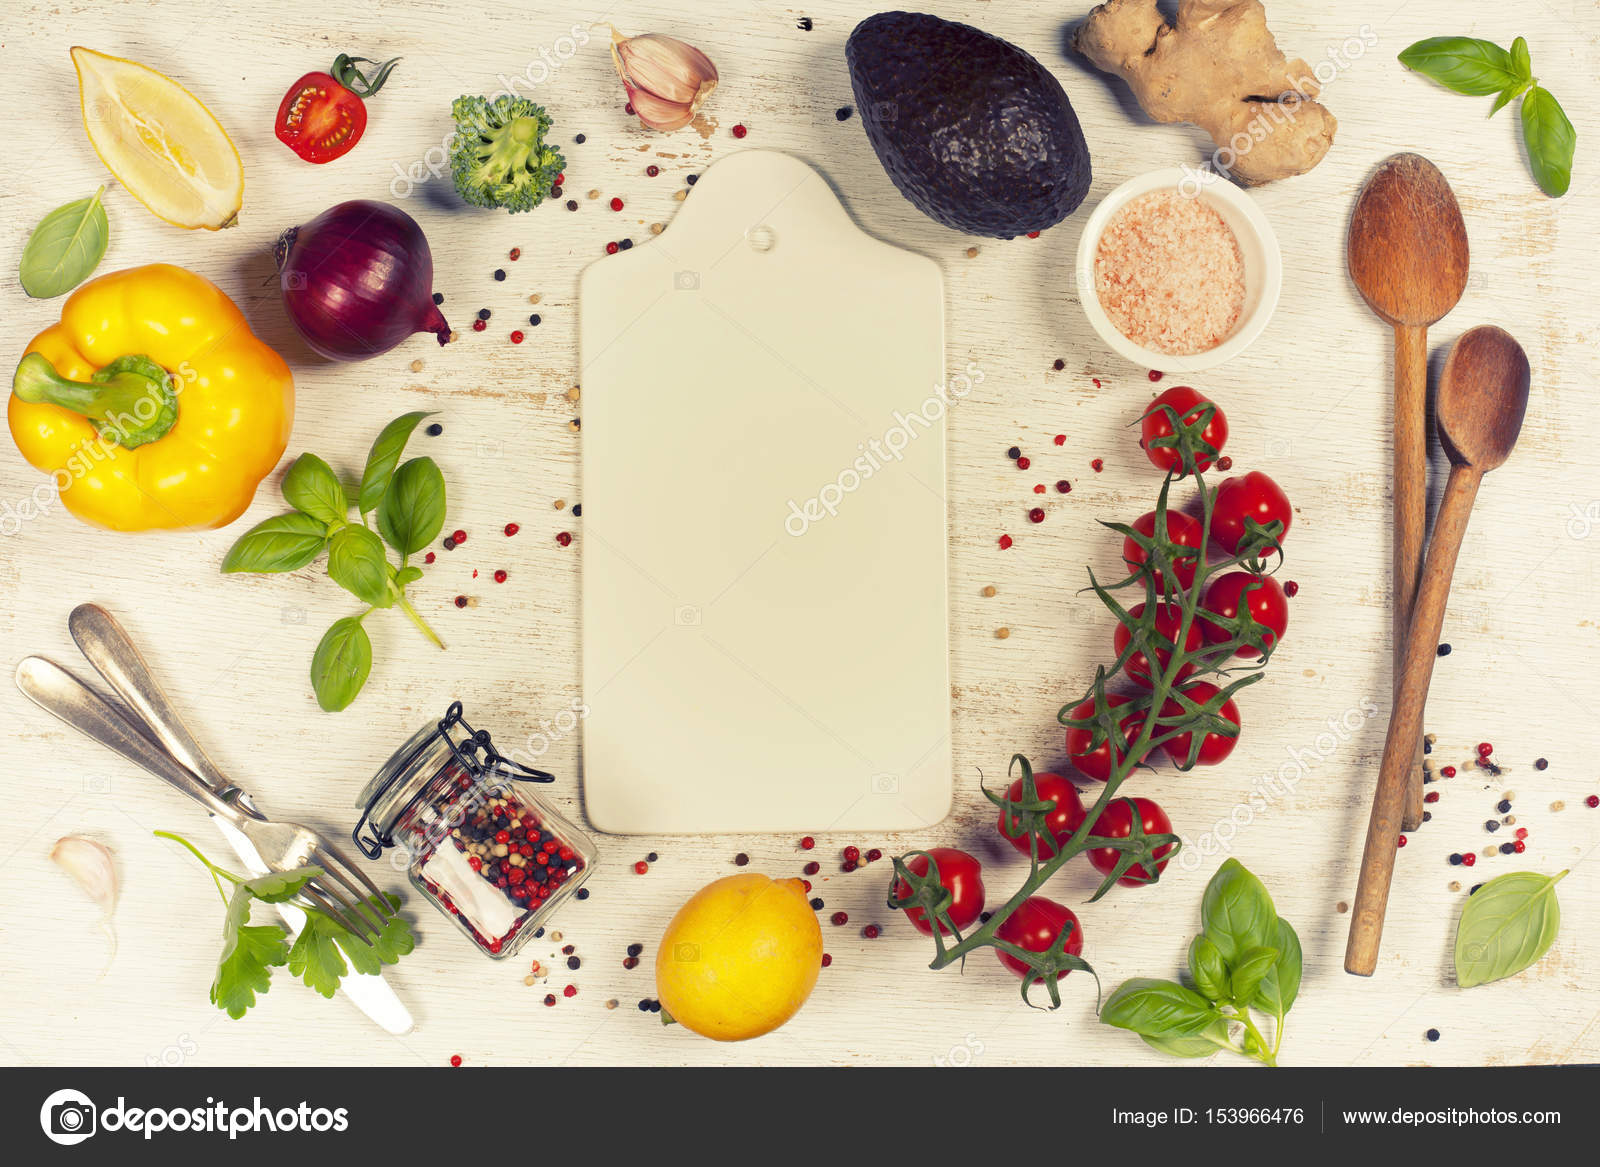 Healthy food background Stock Photo by ©klenova 153966476